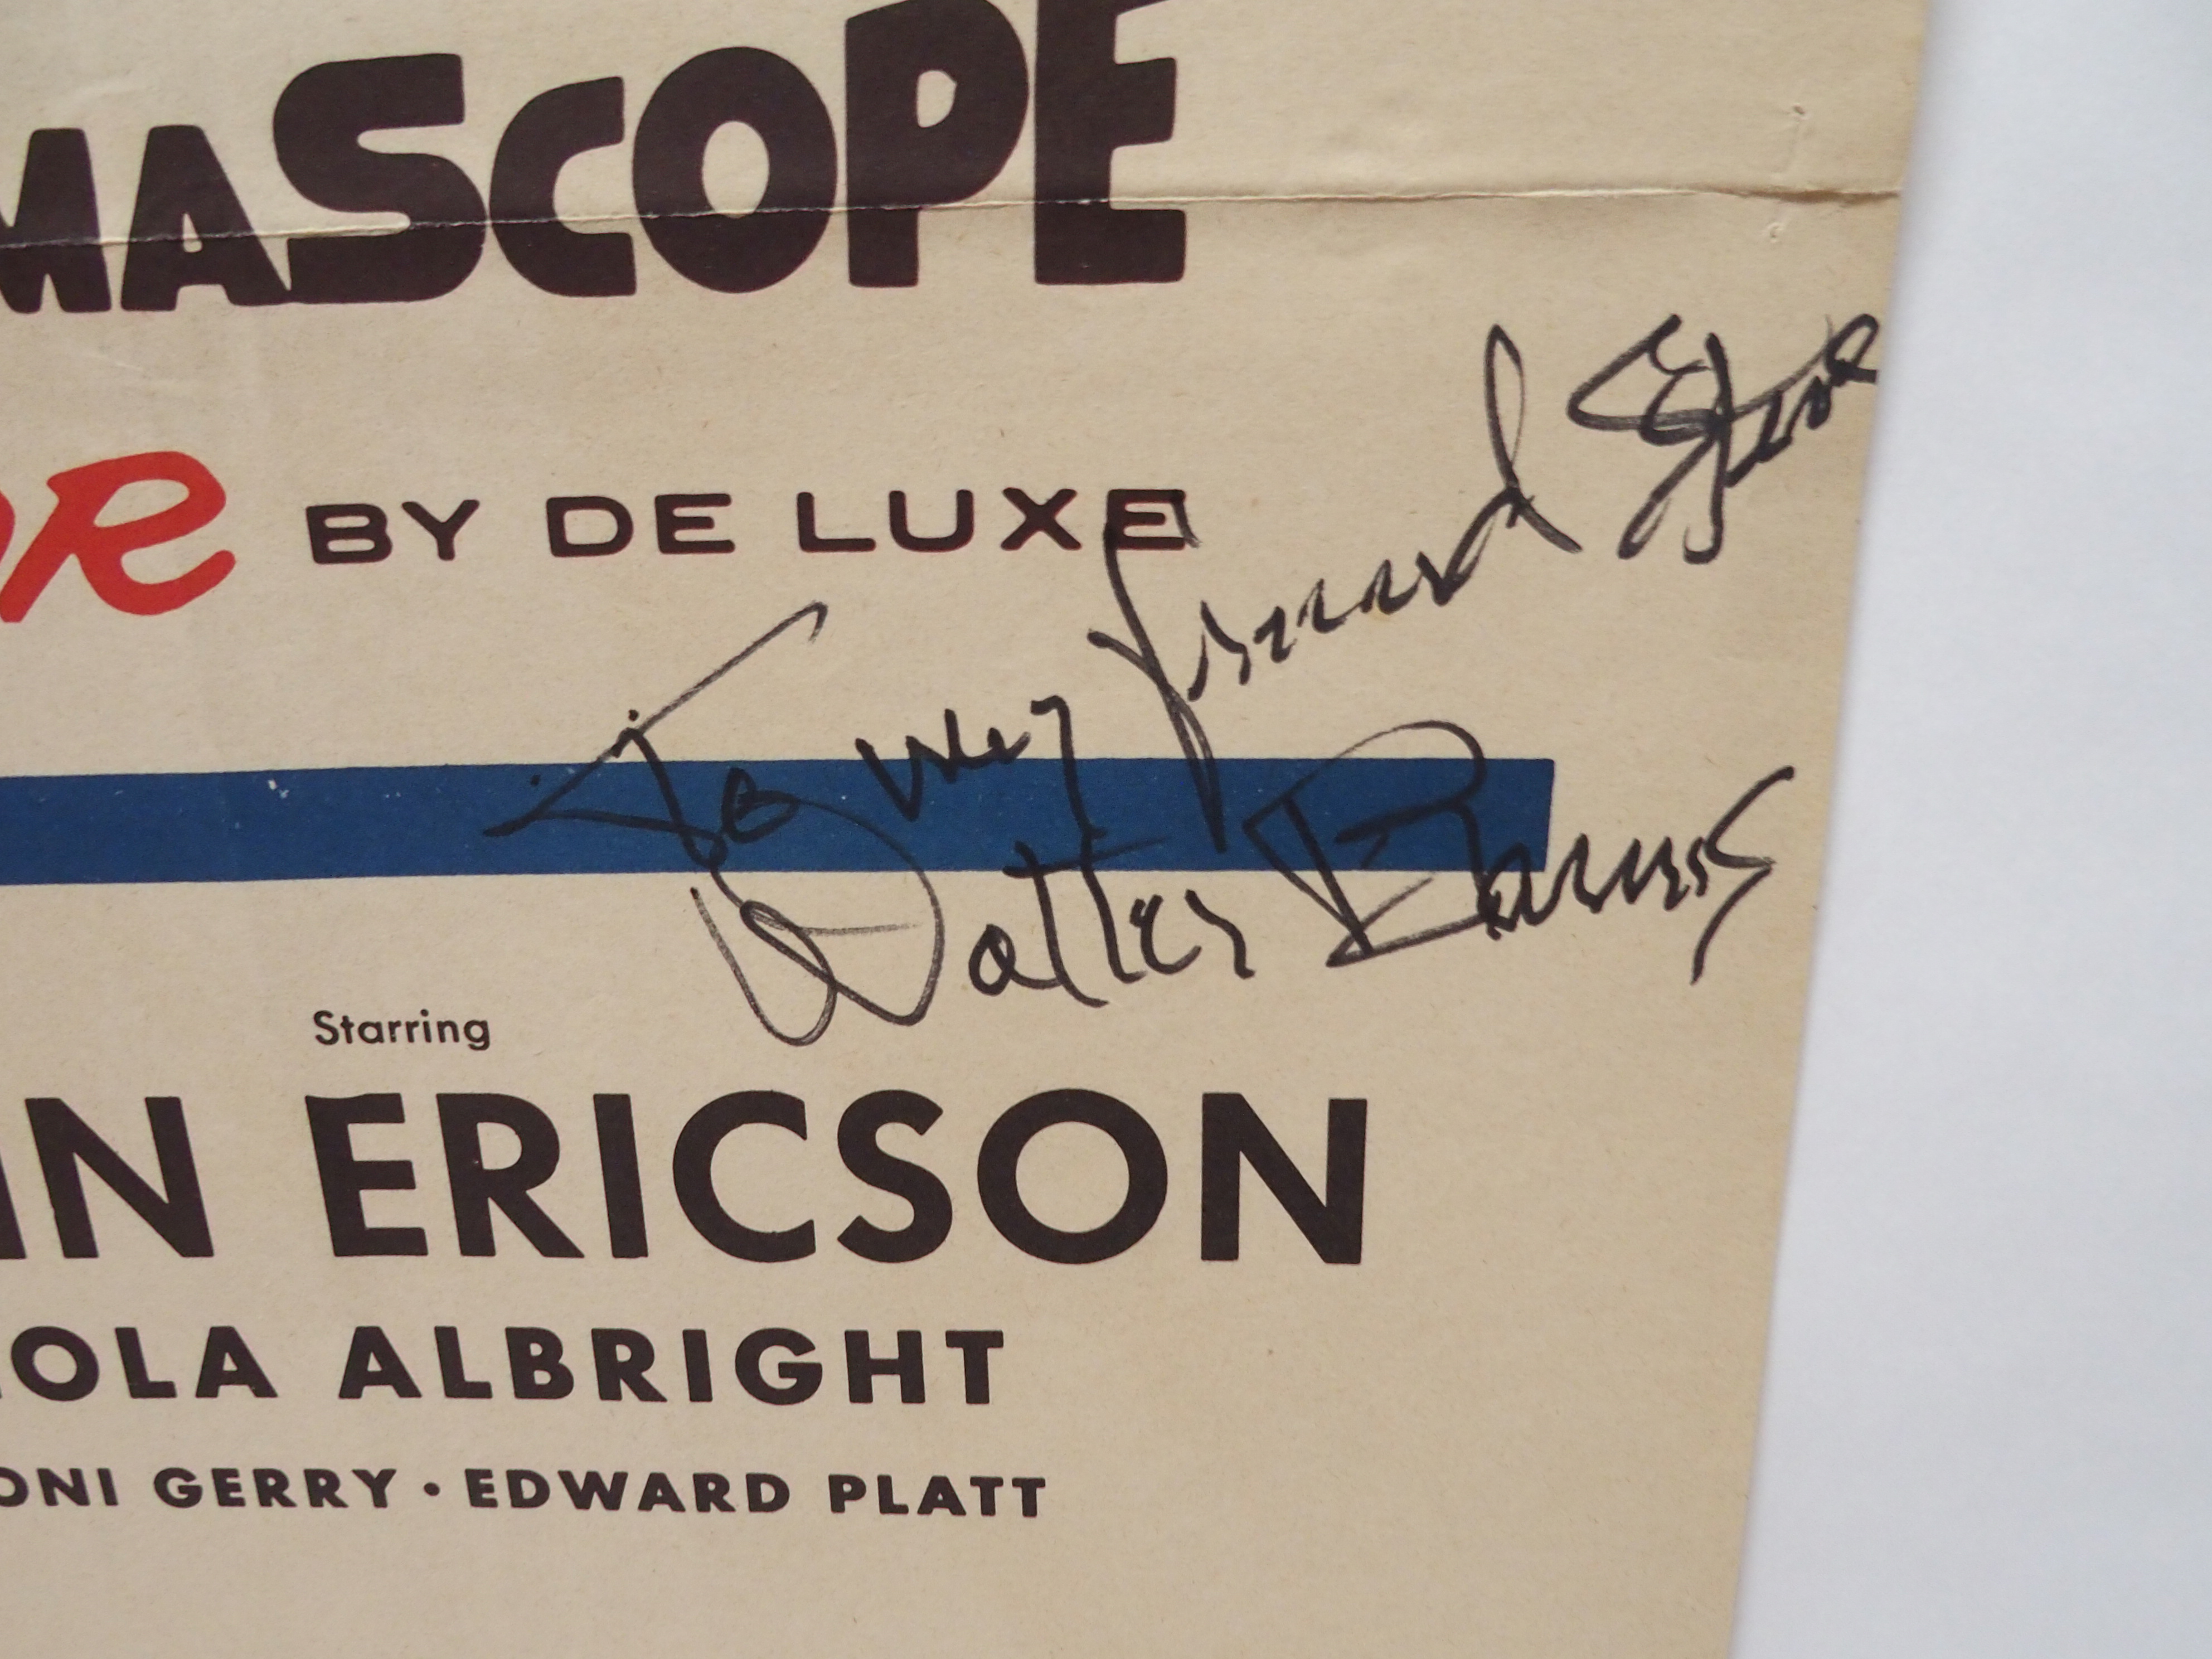 OREGON PASSAGE movie poster, dedicated and autographed by Walter Barnes, horizontal and vertical - Image 6 of 8